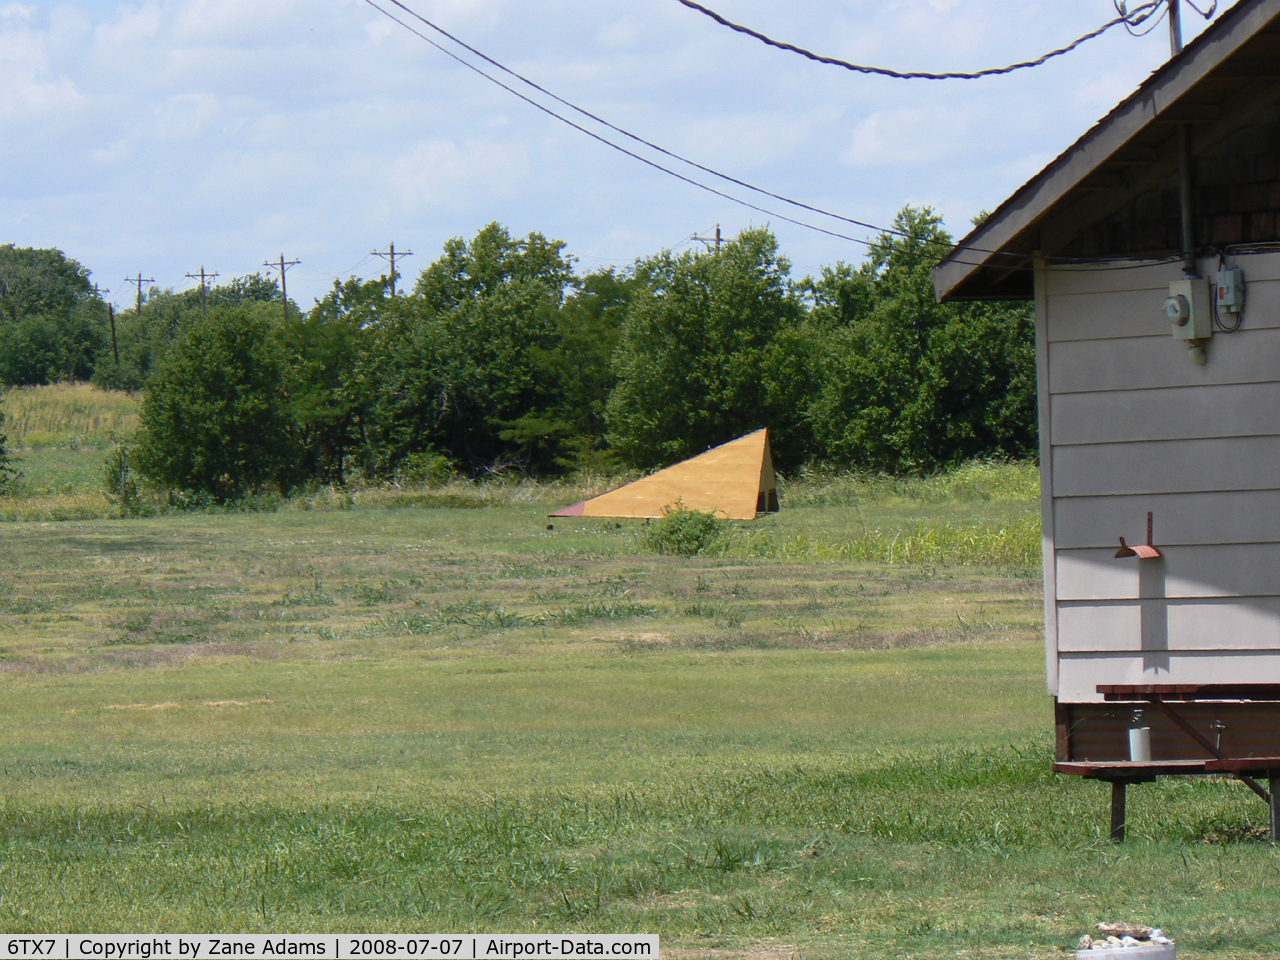 Flying L Airpark Airport (6TX7) - Flying L Private Strip - Unsure weather this airfield is still open. There is a fence and new subdivision of houses built with in yards of the hanger building, there was no airplane in the hanger and I could not see the runway